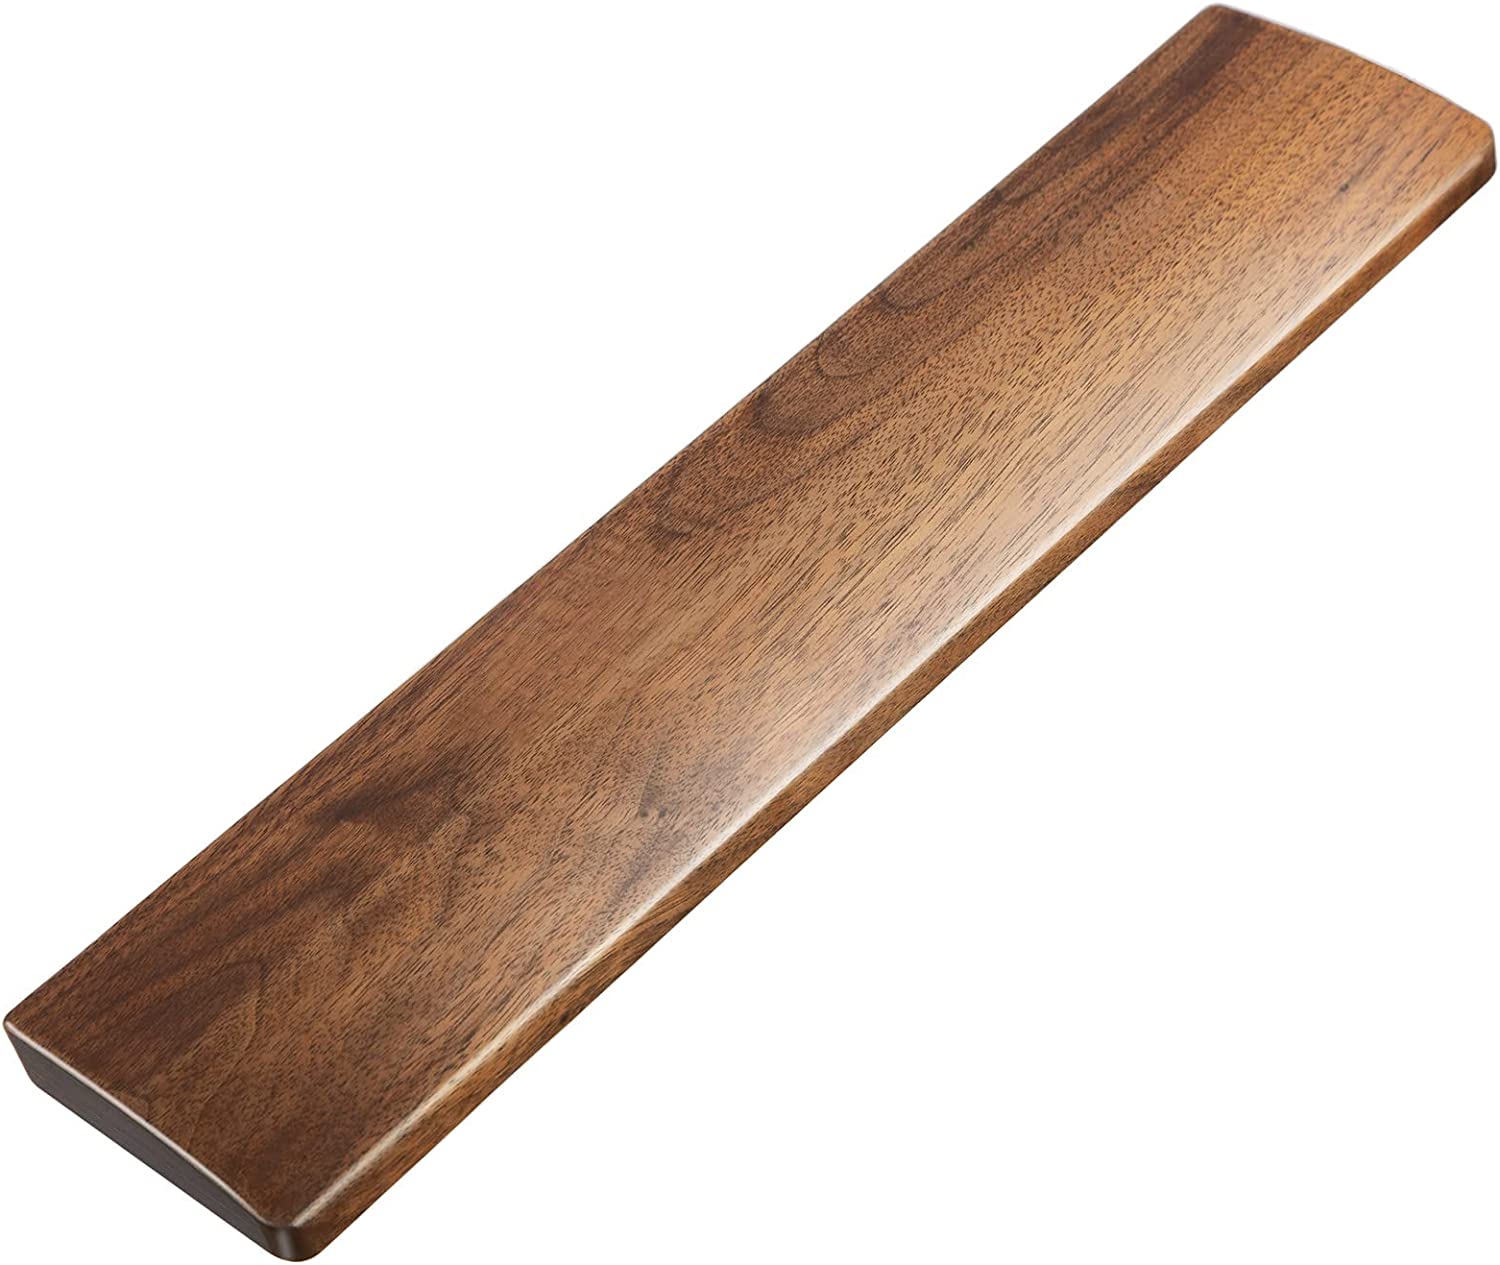 Faluber Natural Eco-Friendly Wooden Wrist Rest